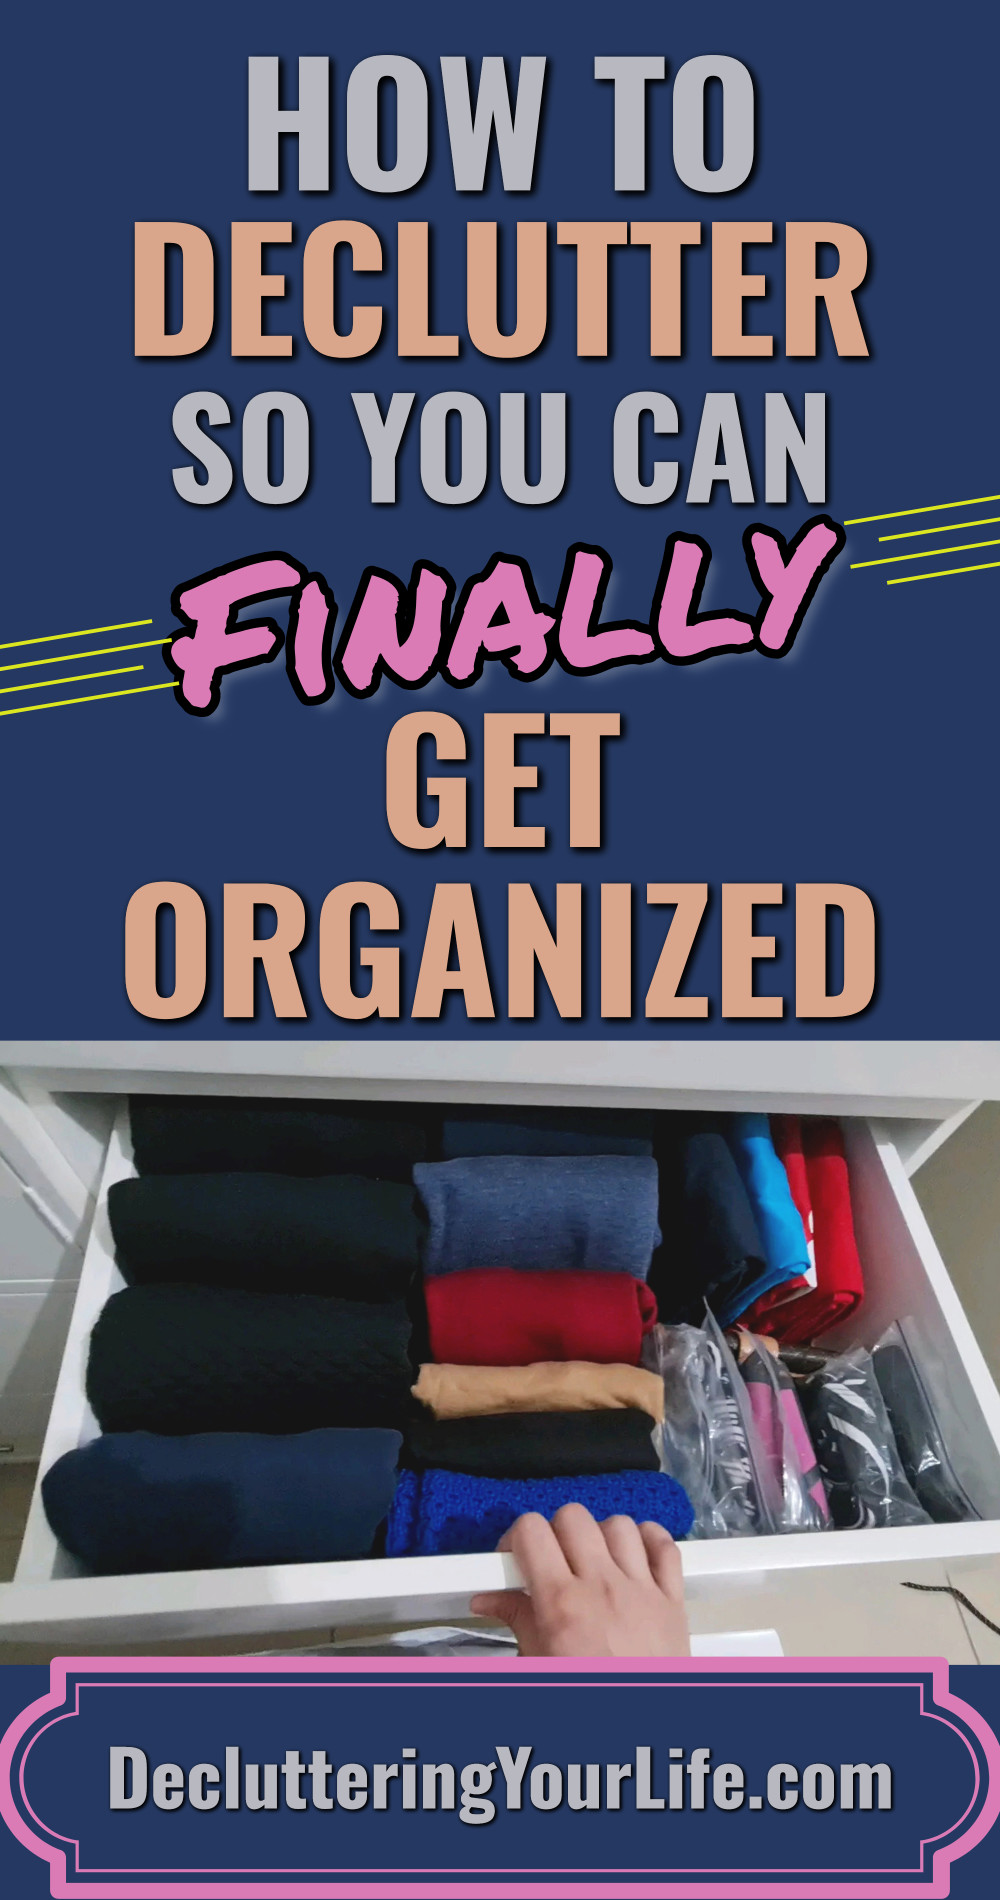 How To Declutter So You Can Finally Get Organized